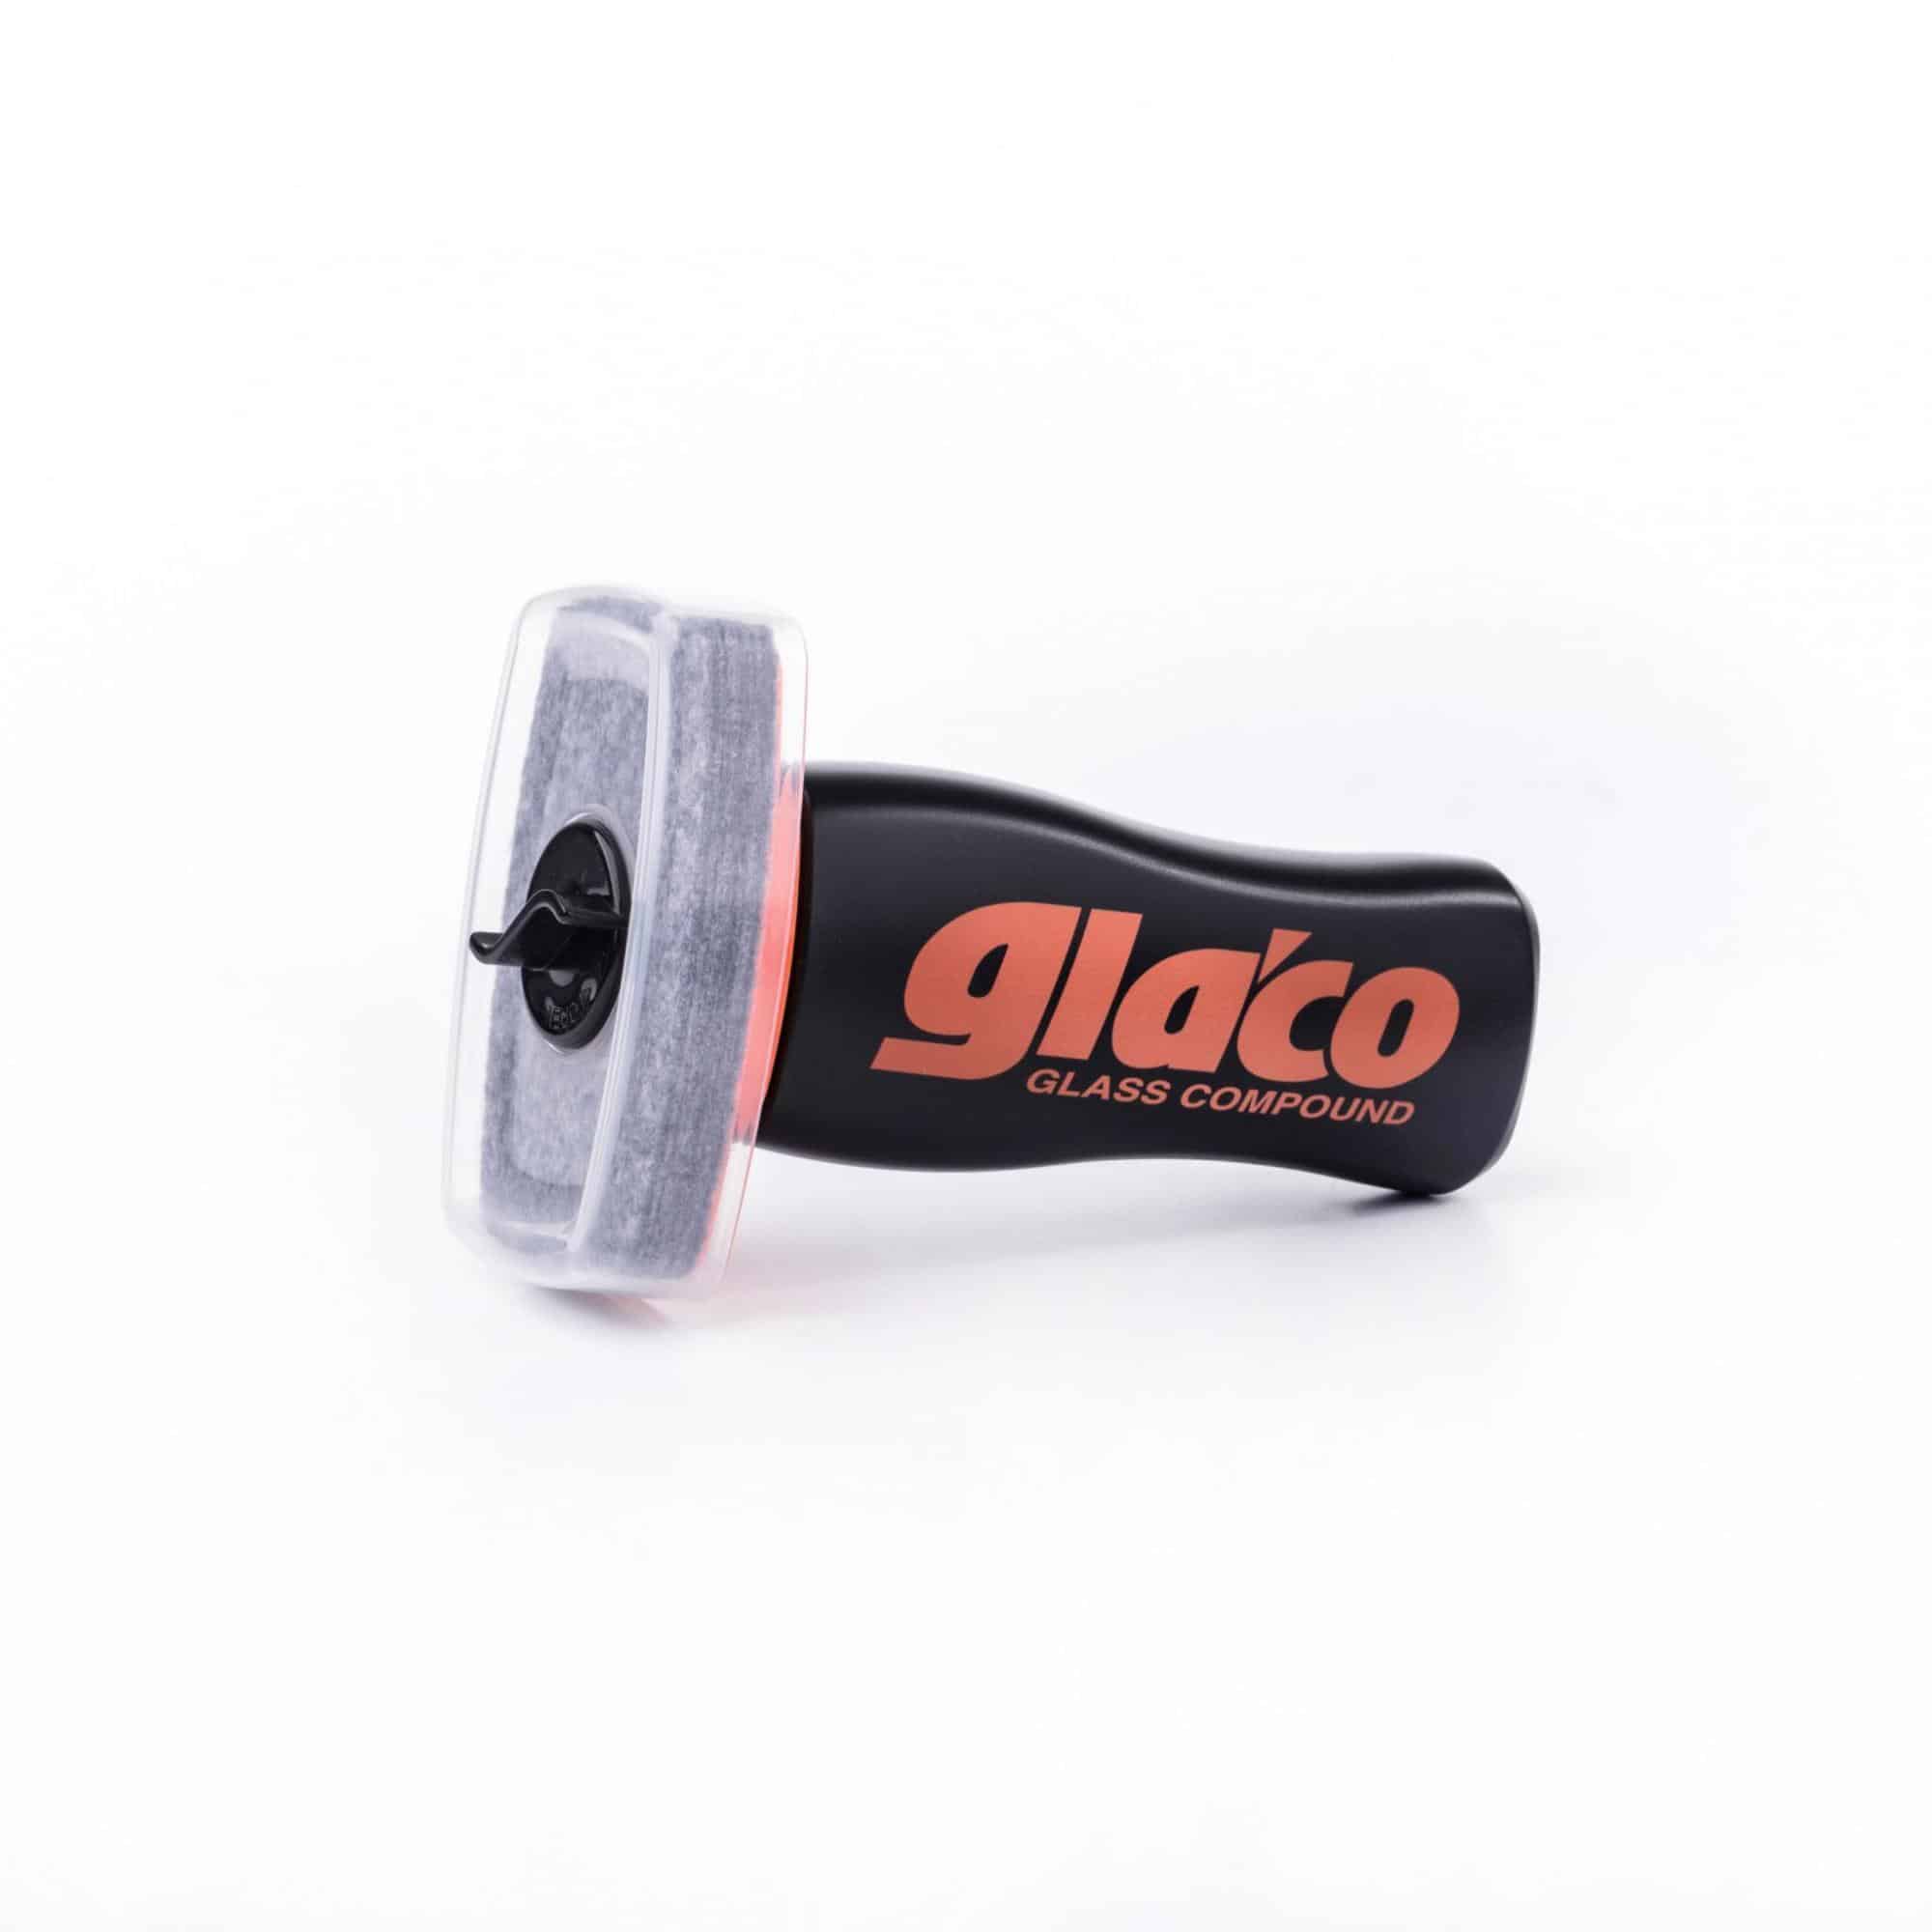 Glaco Glass Compound Roll On 3